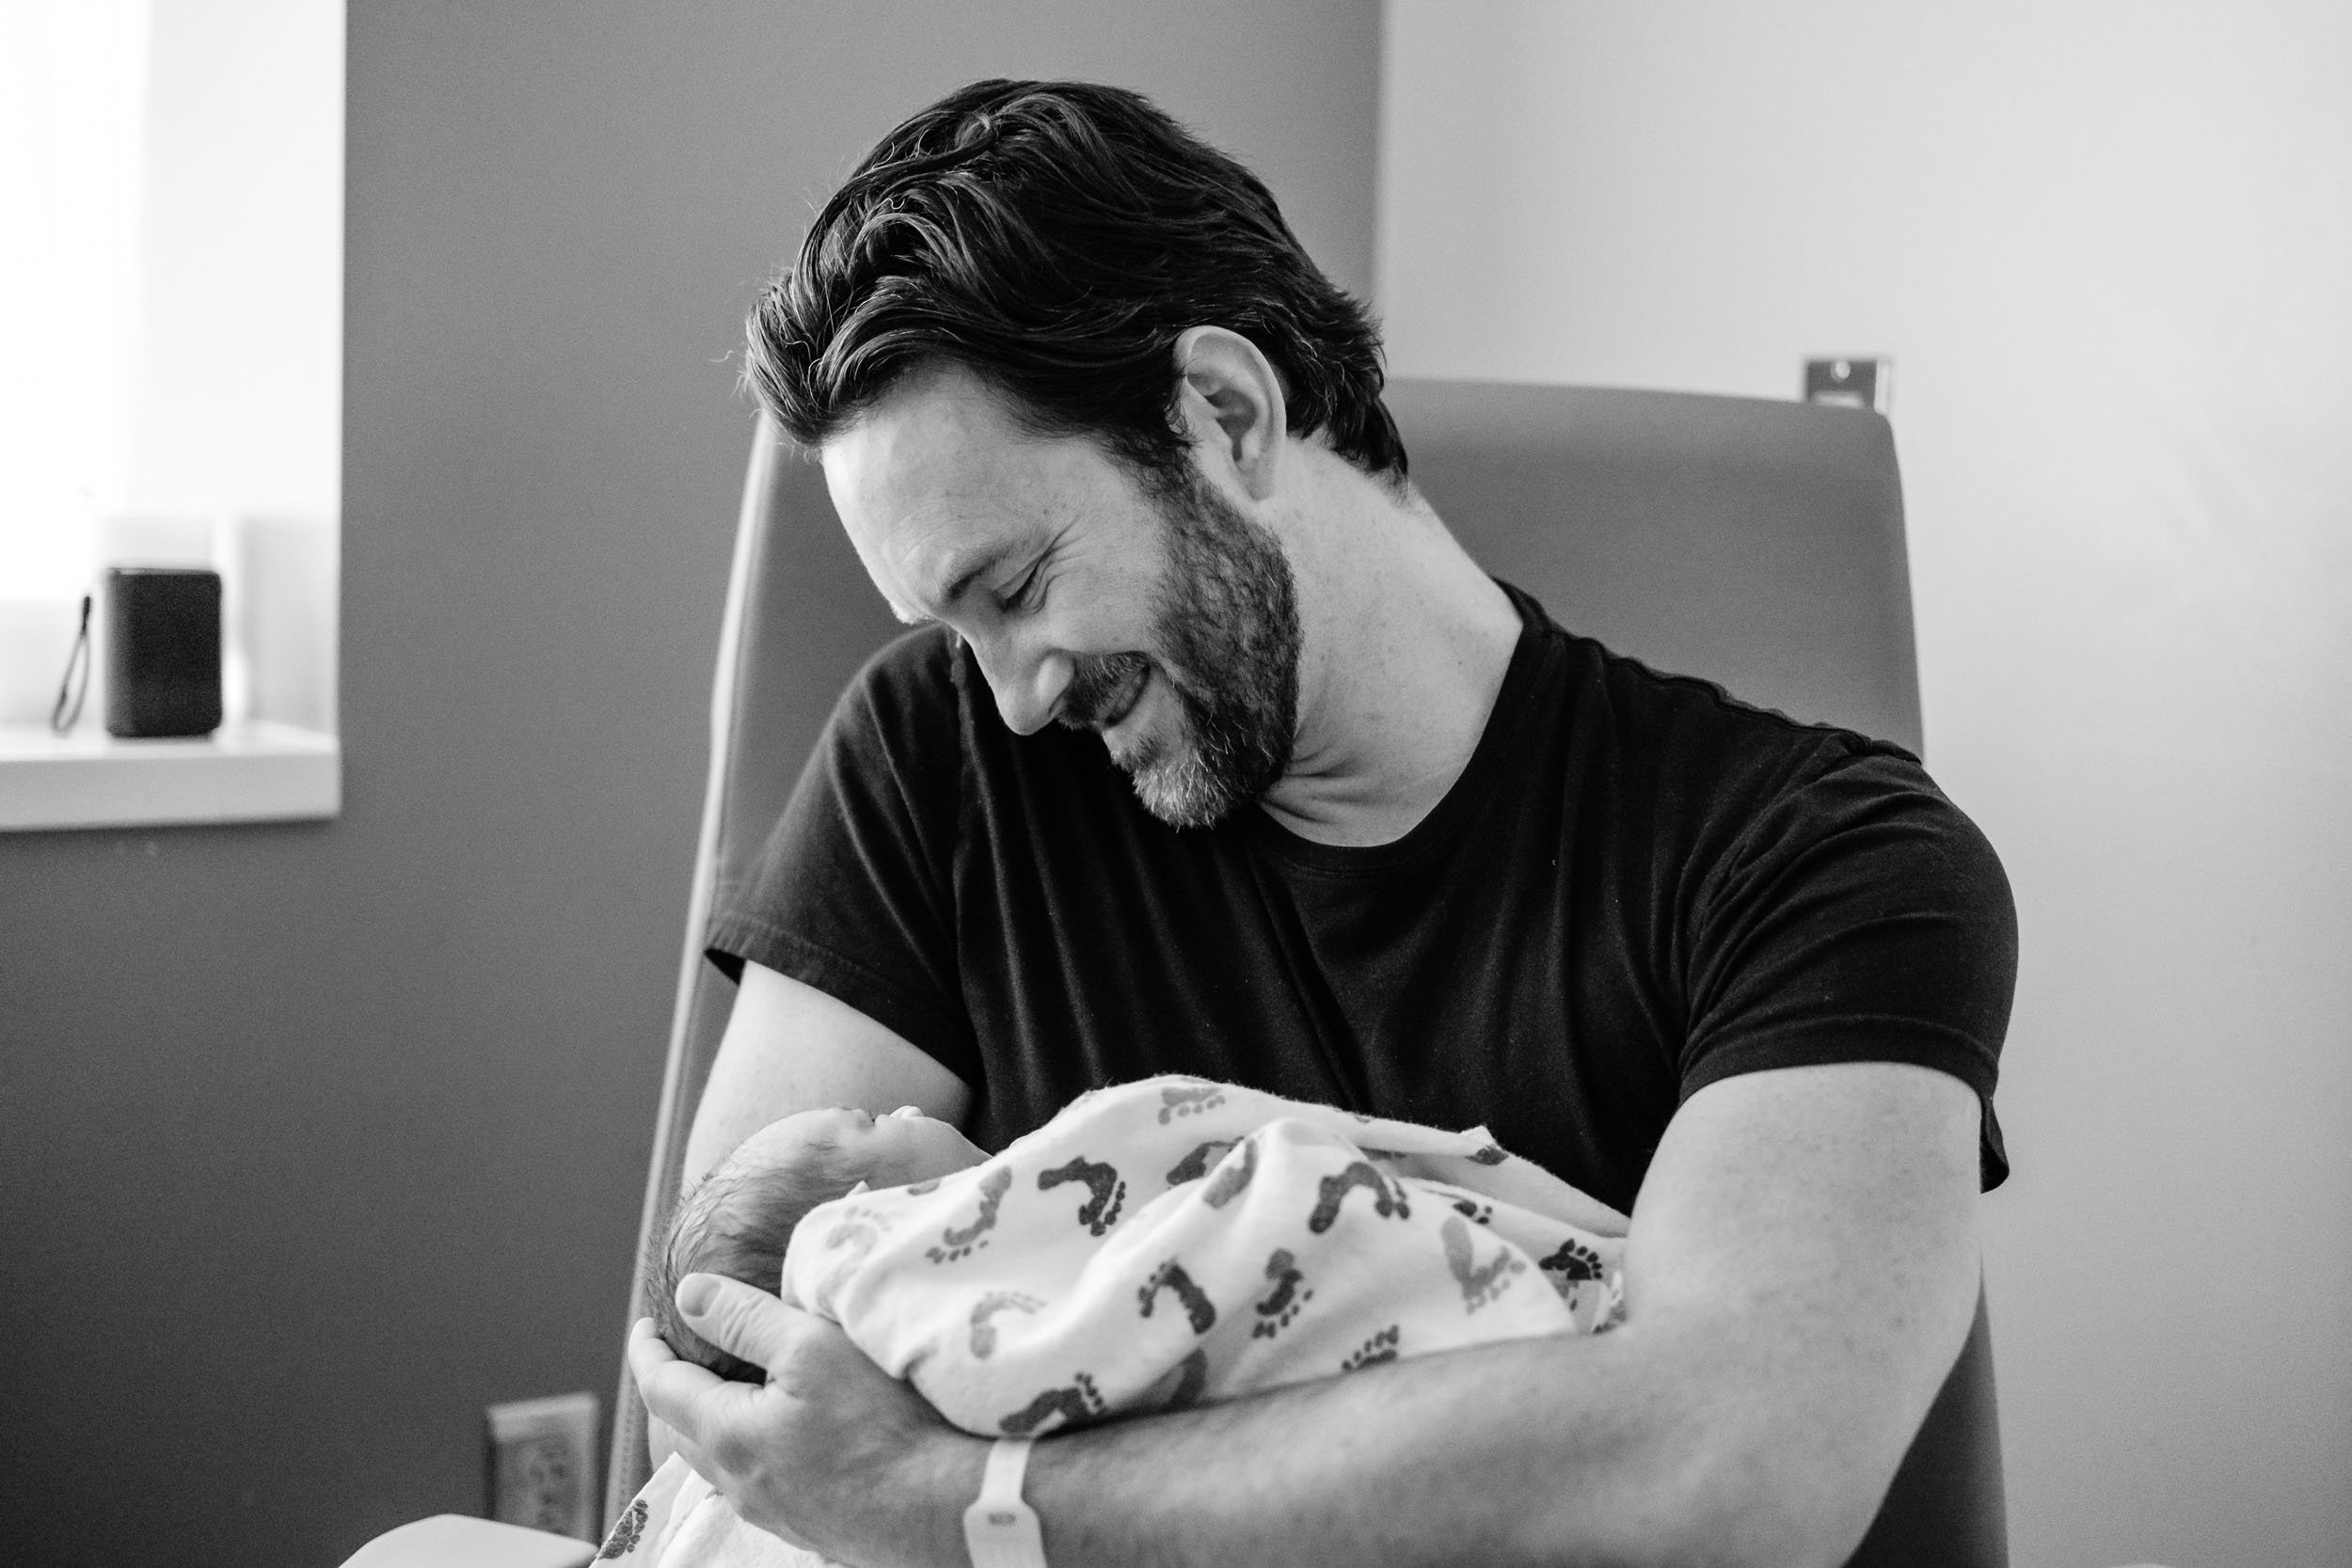 A father smiles and looks down lovingly while holding his newborn son in his arms.